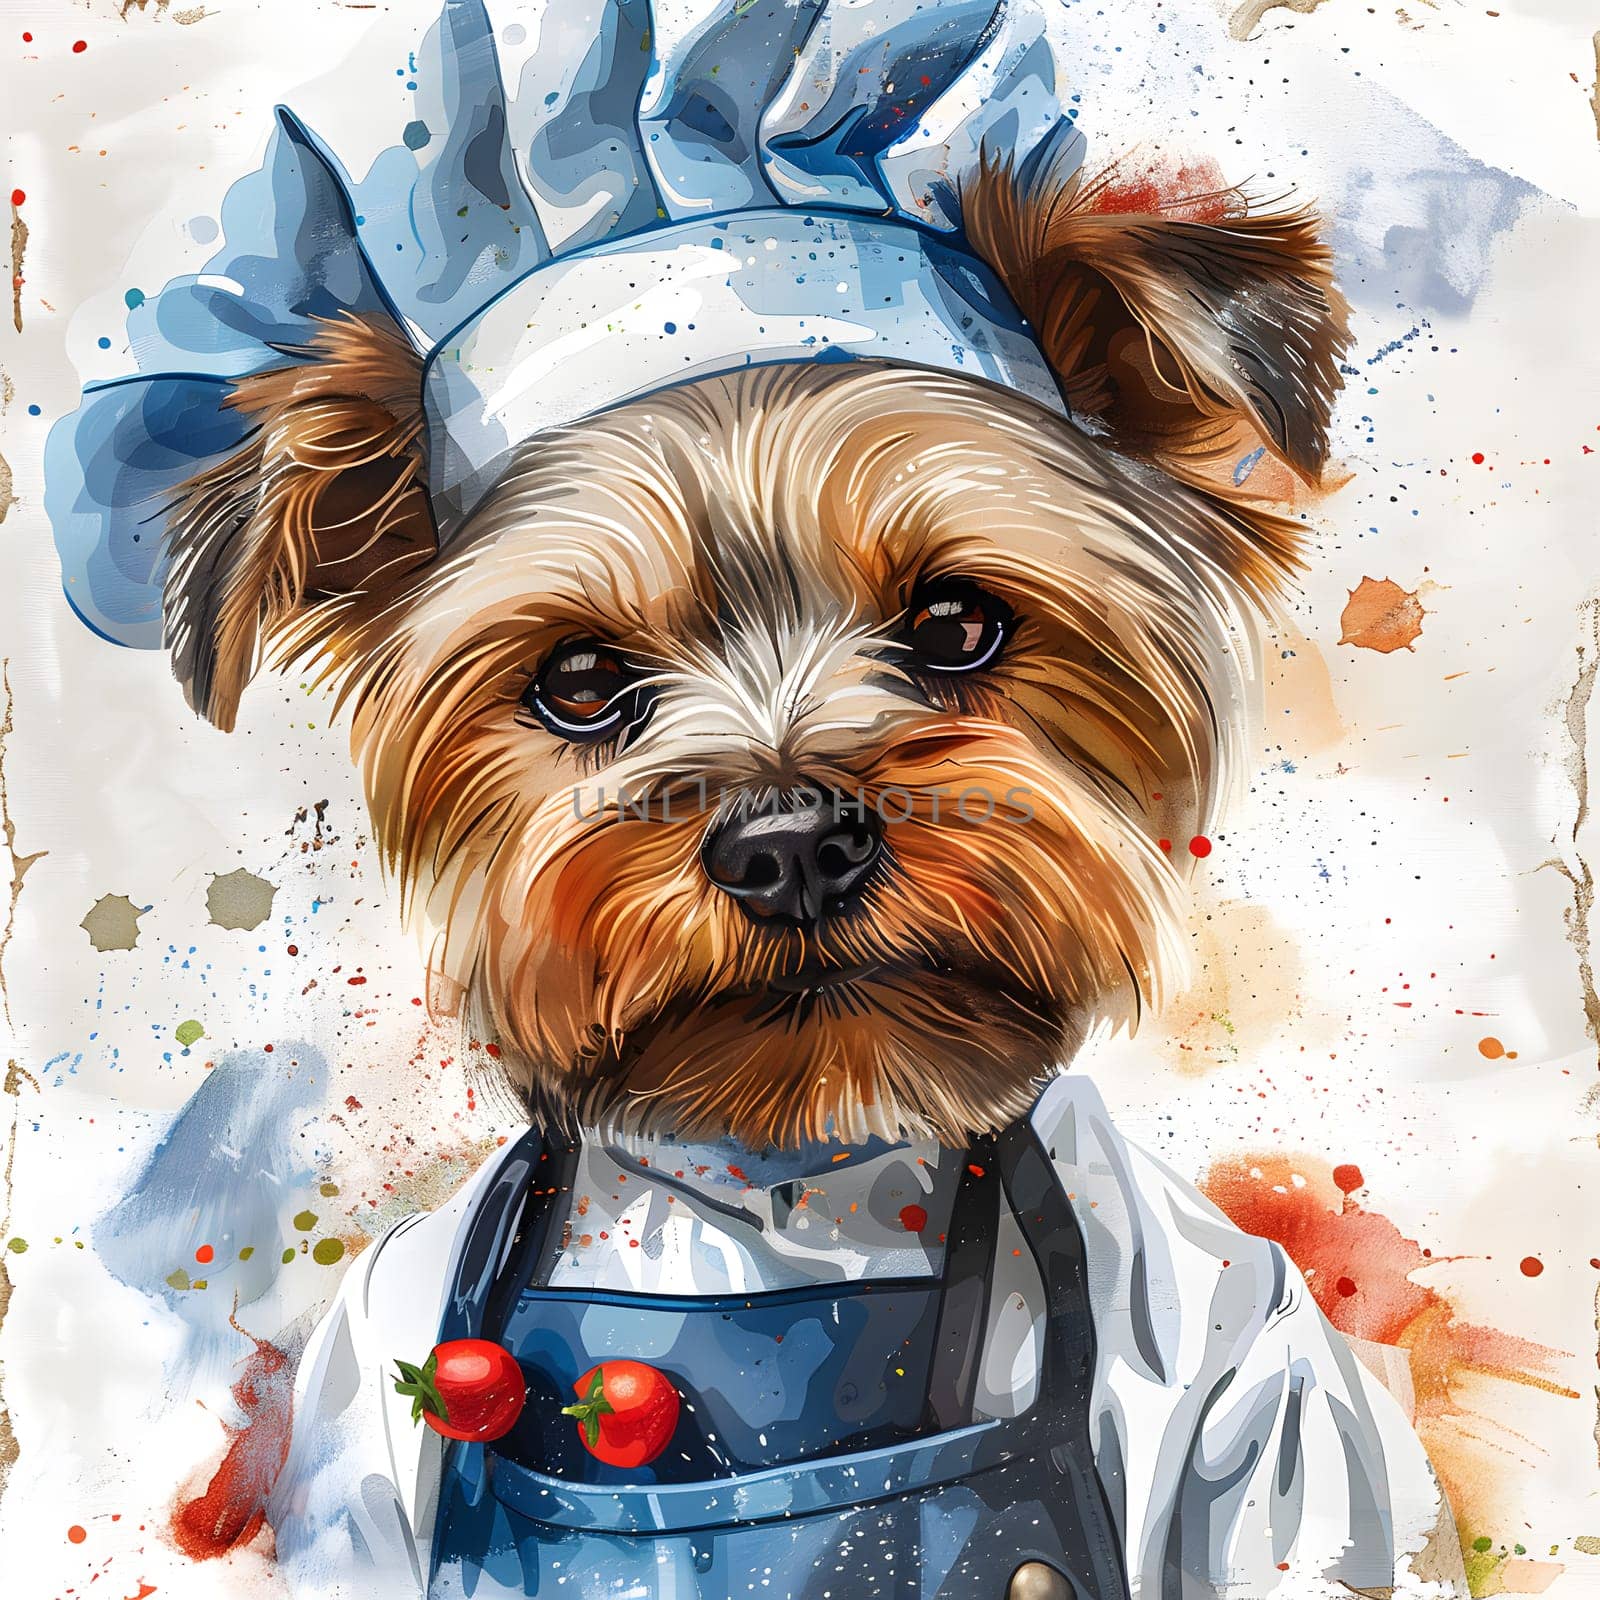 Yorkshire Terrier dressed as chef with hat and apron, popular companion dog by Nadtochiy